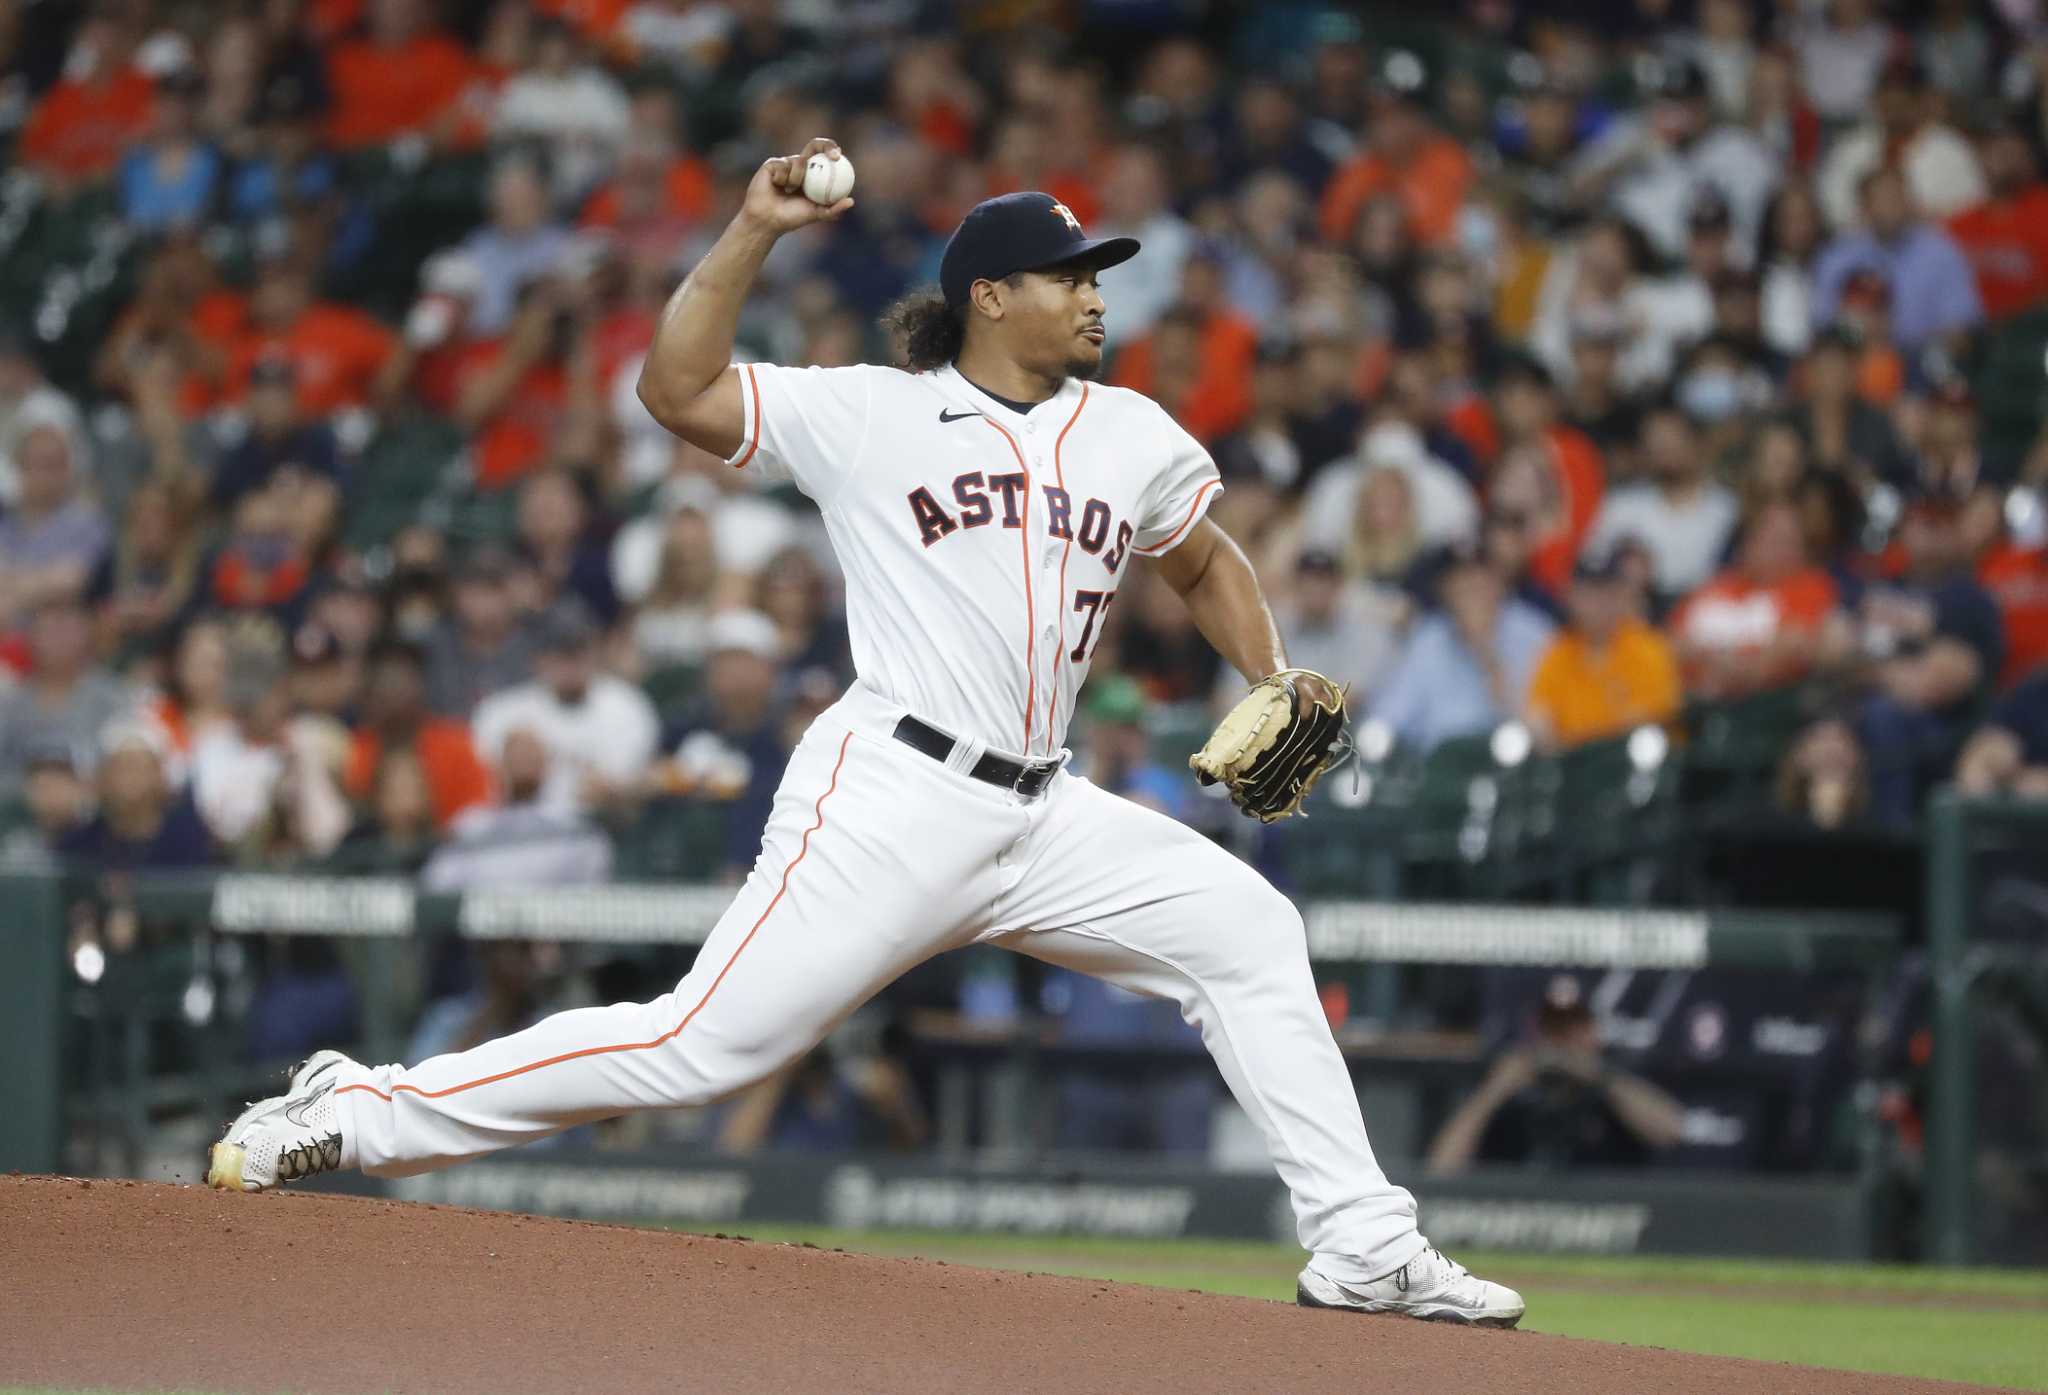 Peña has career-high 4 RBIs as Astros score season high in 17-4 rout of  Rays - ABC News